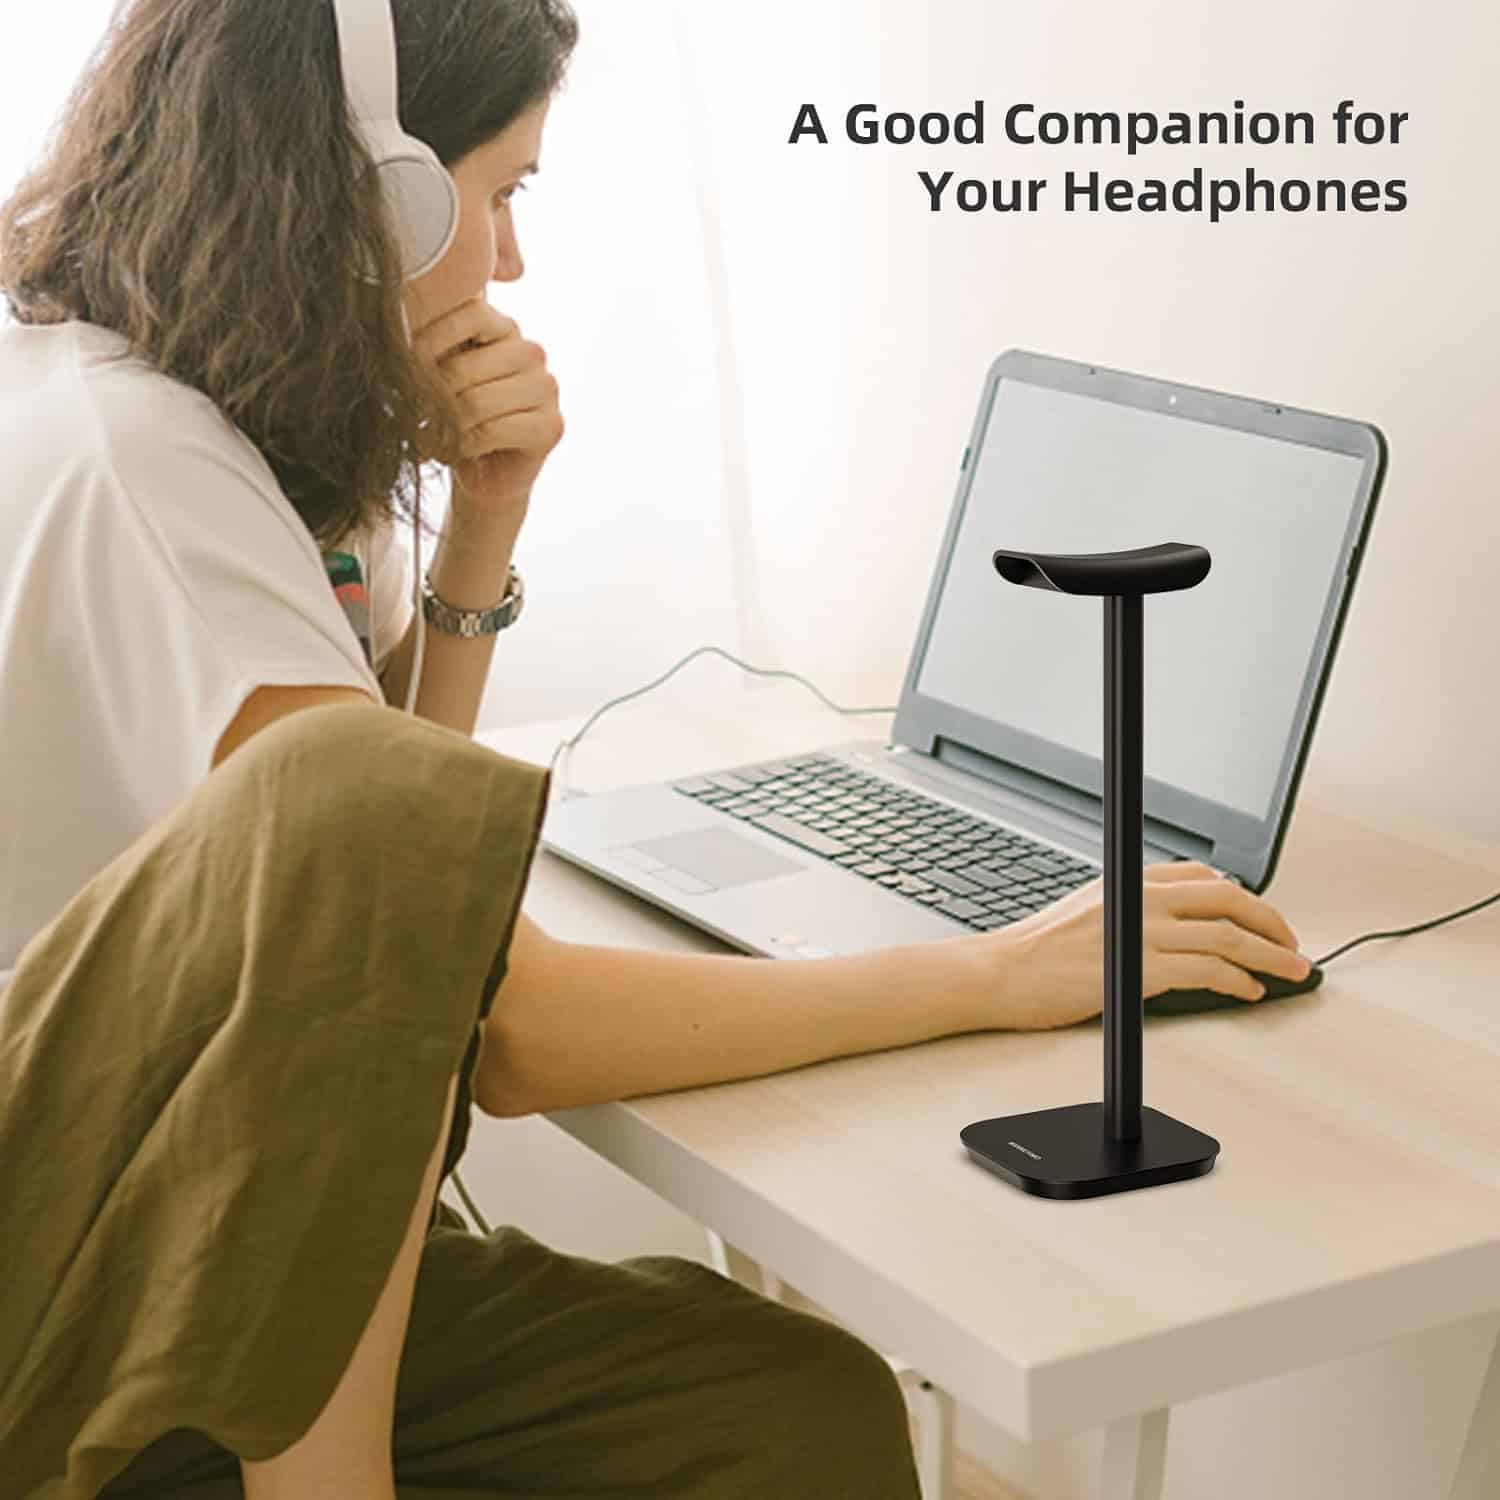 MANMUVIMO Headphone Stand: The Perfect Desktop Accessory for Your Headset